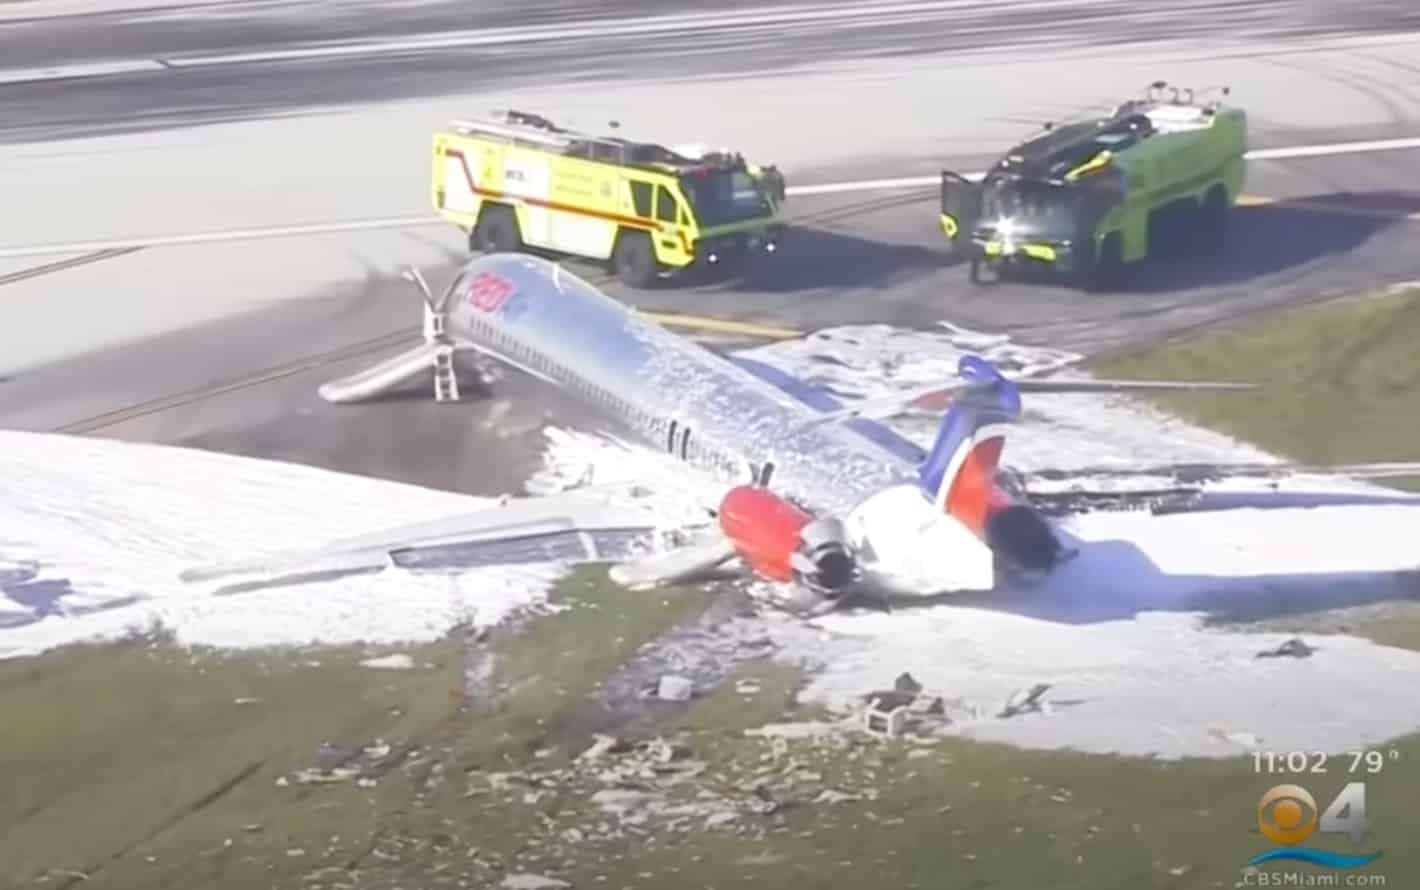 2 Weeks After U.S. Flights Expansion, Red Air Crash-Landed At Miami Airport